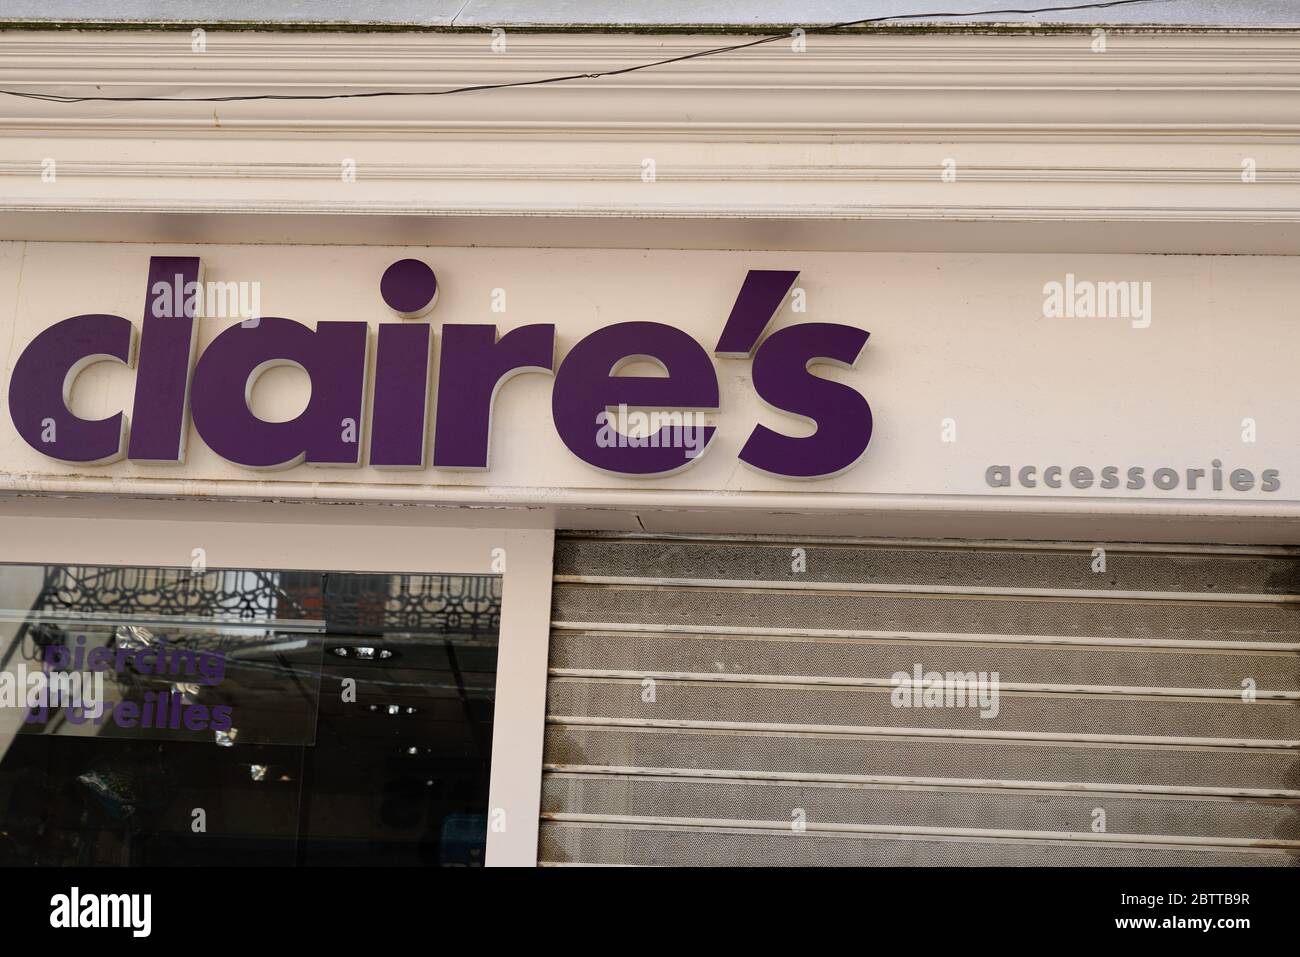 Bordeaux , Aquitaine / France - 05 05 2020 : claire's accessories shop sign and logo on the store Stock Photo